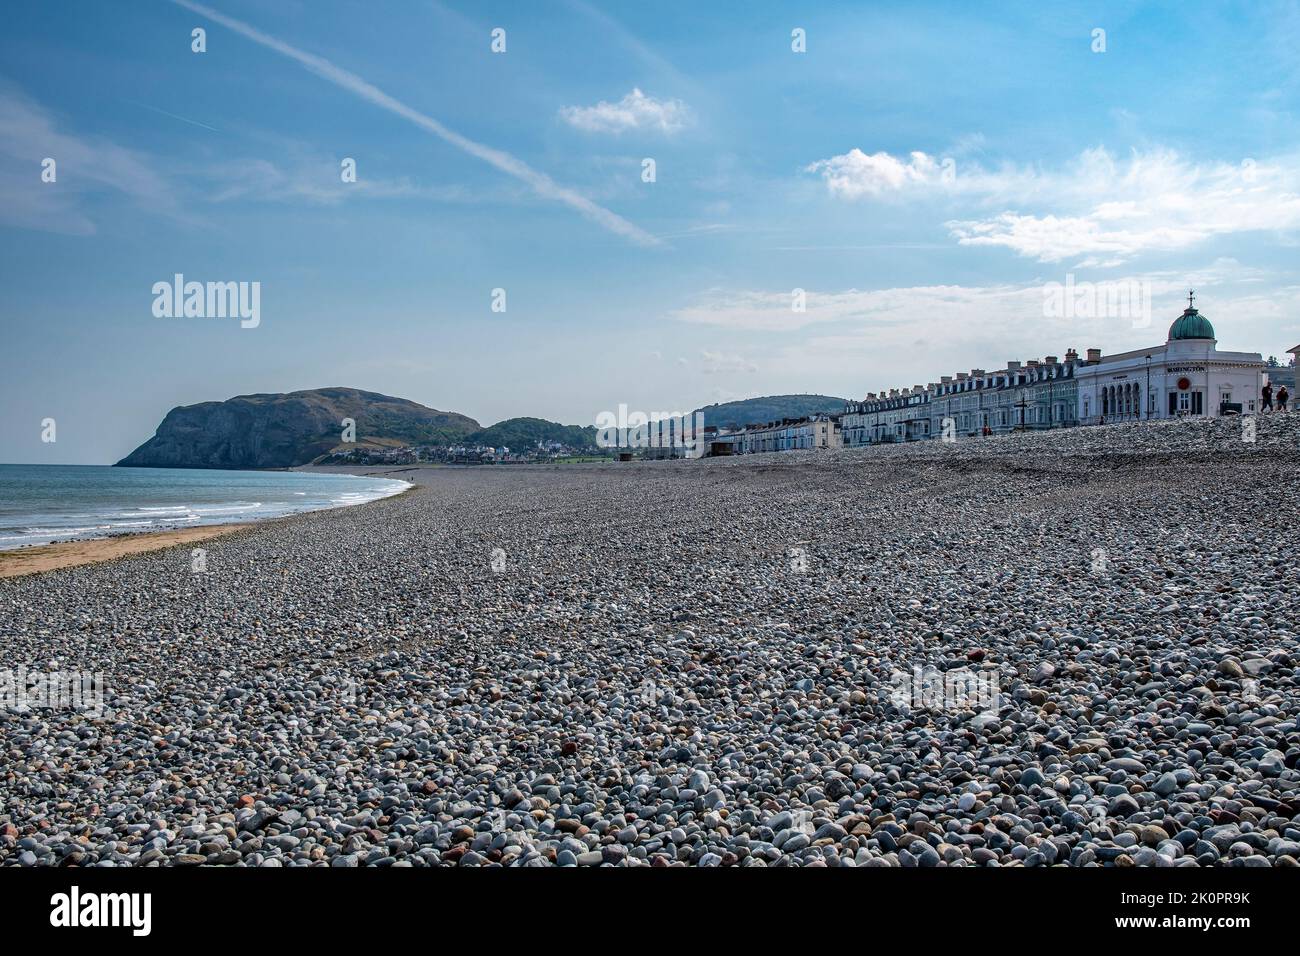 Llandudno is a coastal town in North Wales. It’s known for North Shore Beach and 19th-century Llandudno Pier. Stock Photo